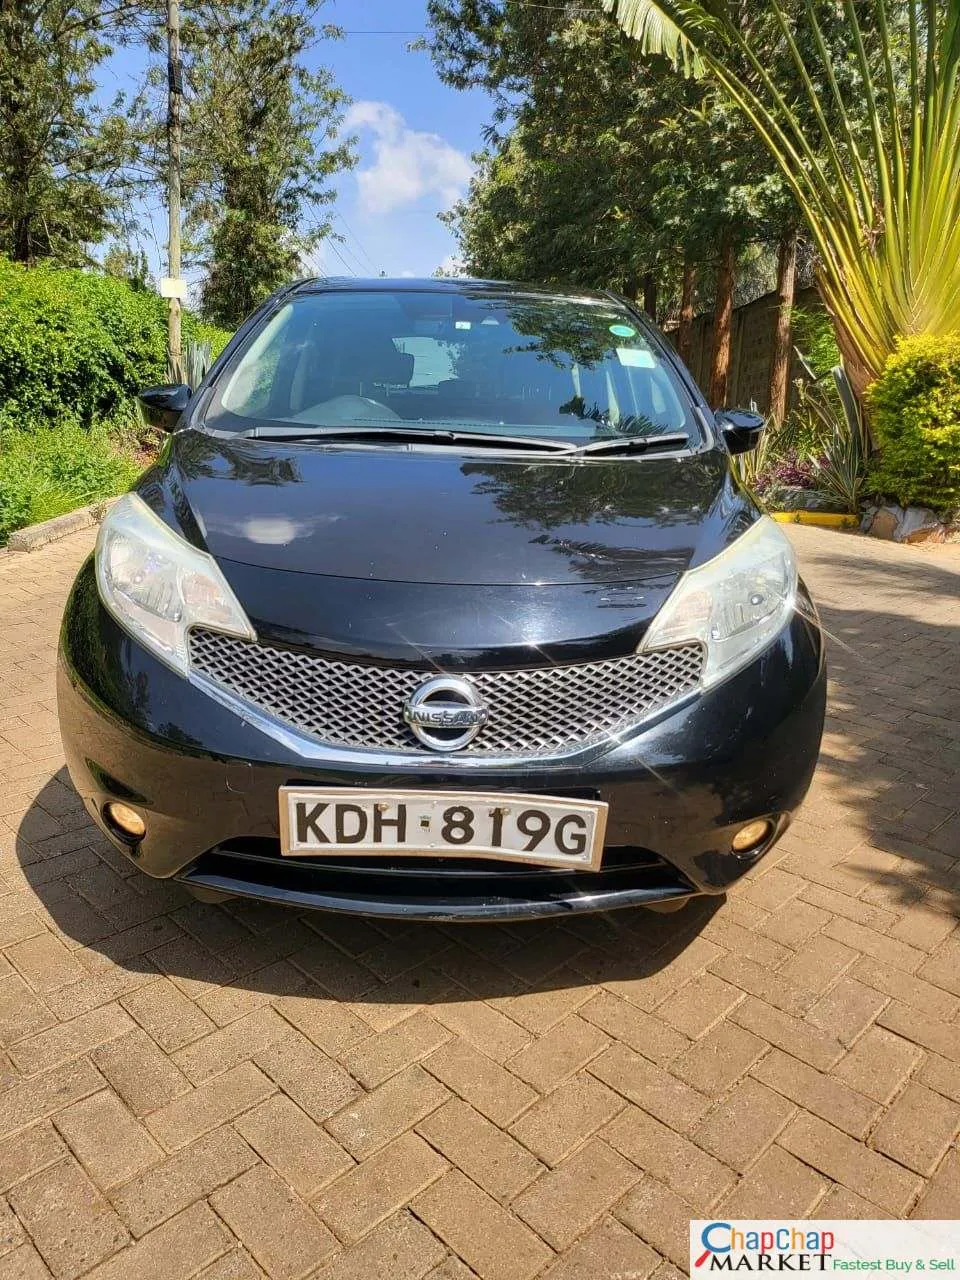 Nissan Note for sale in kenya 🔥 🔥 hire purchase You ONLY Pay 20% Deposit Trade in Ok Wow EXCLUSIVE! DIGS